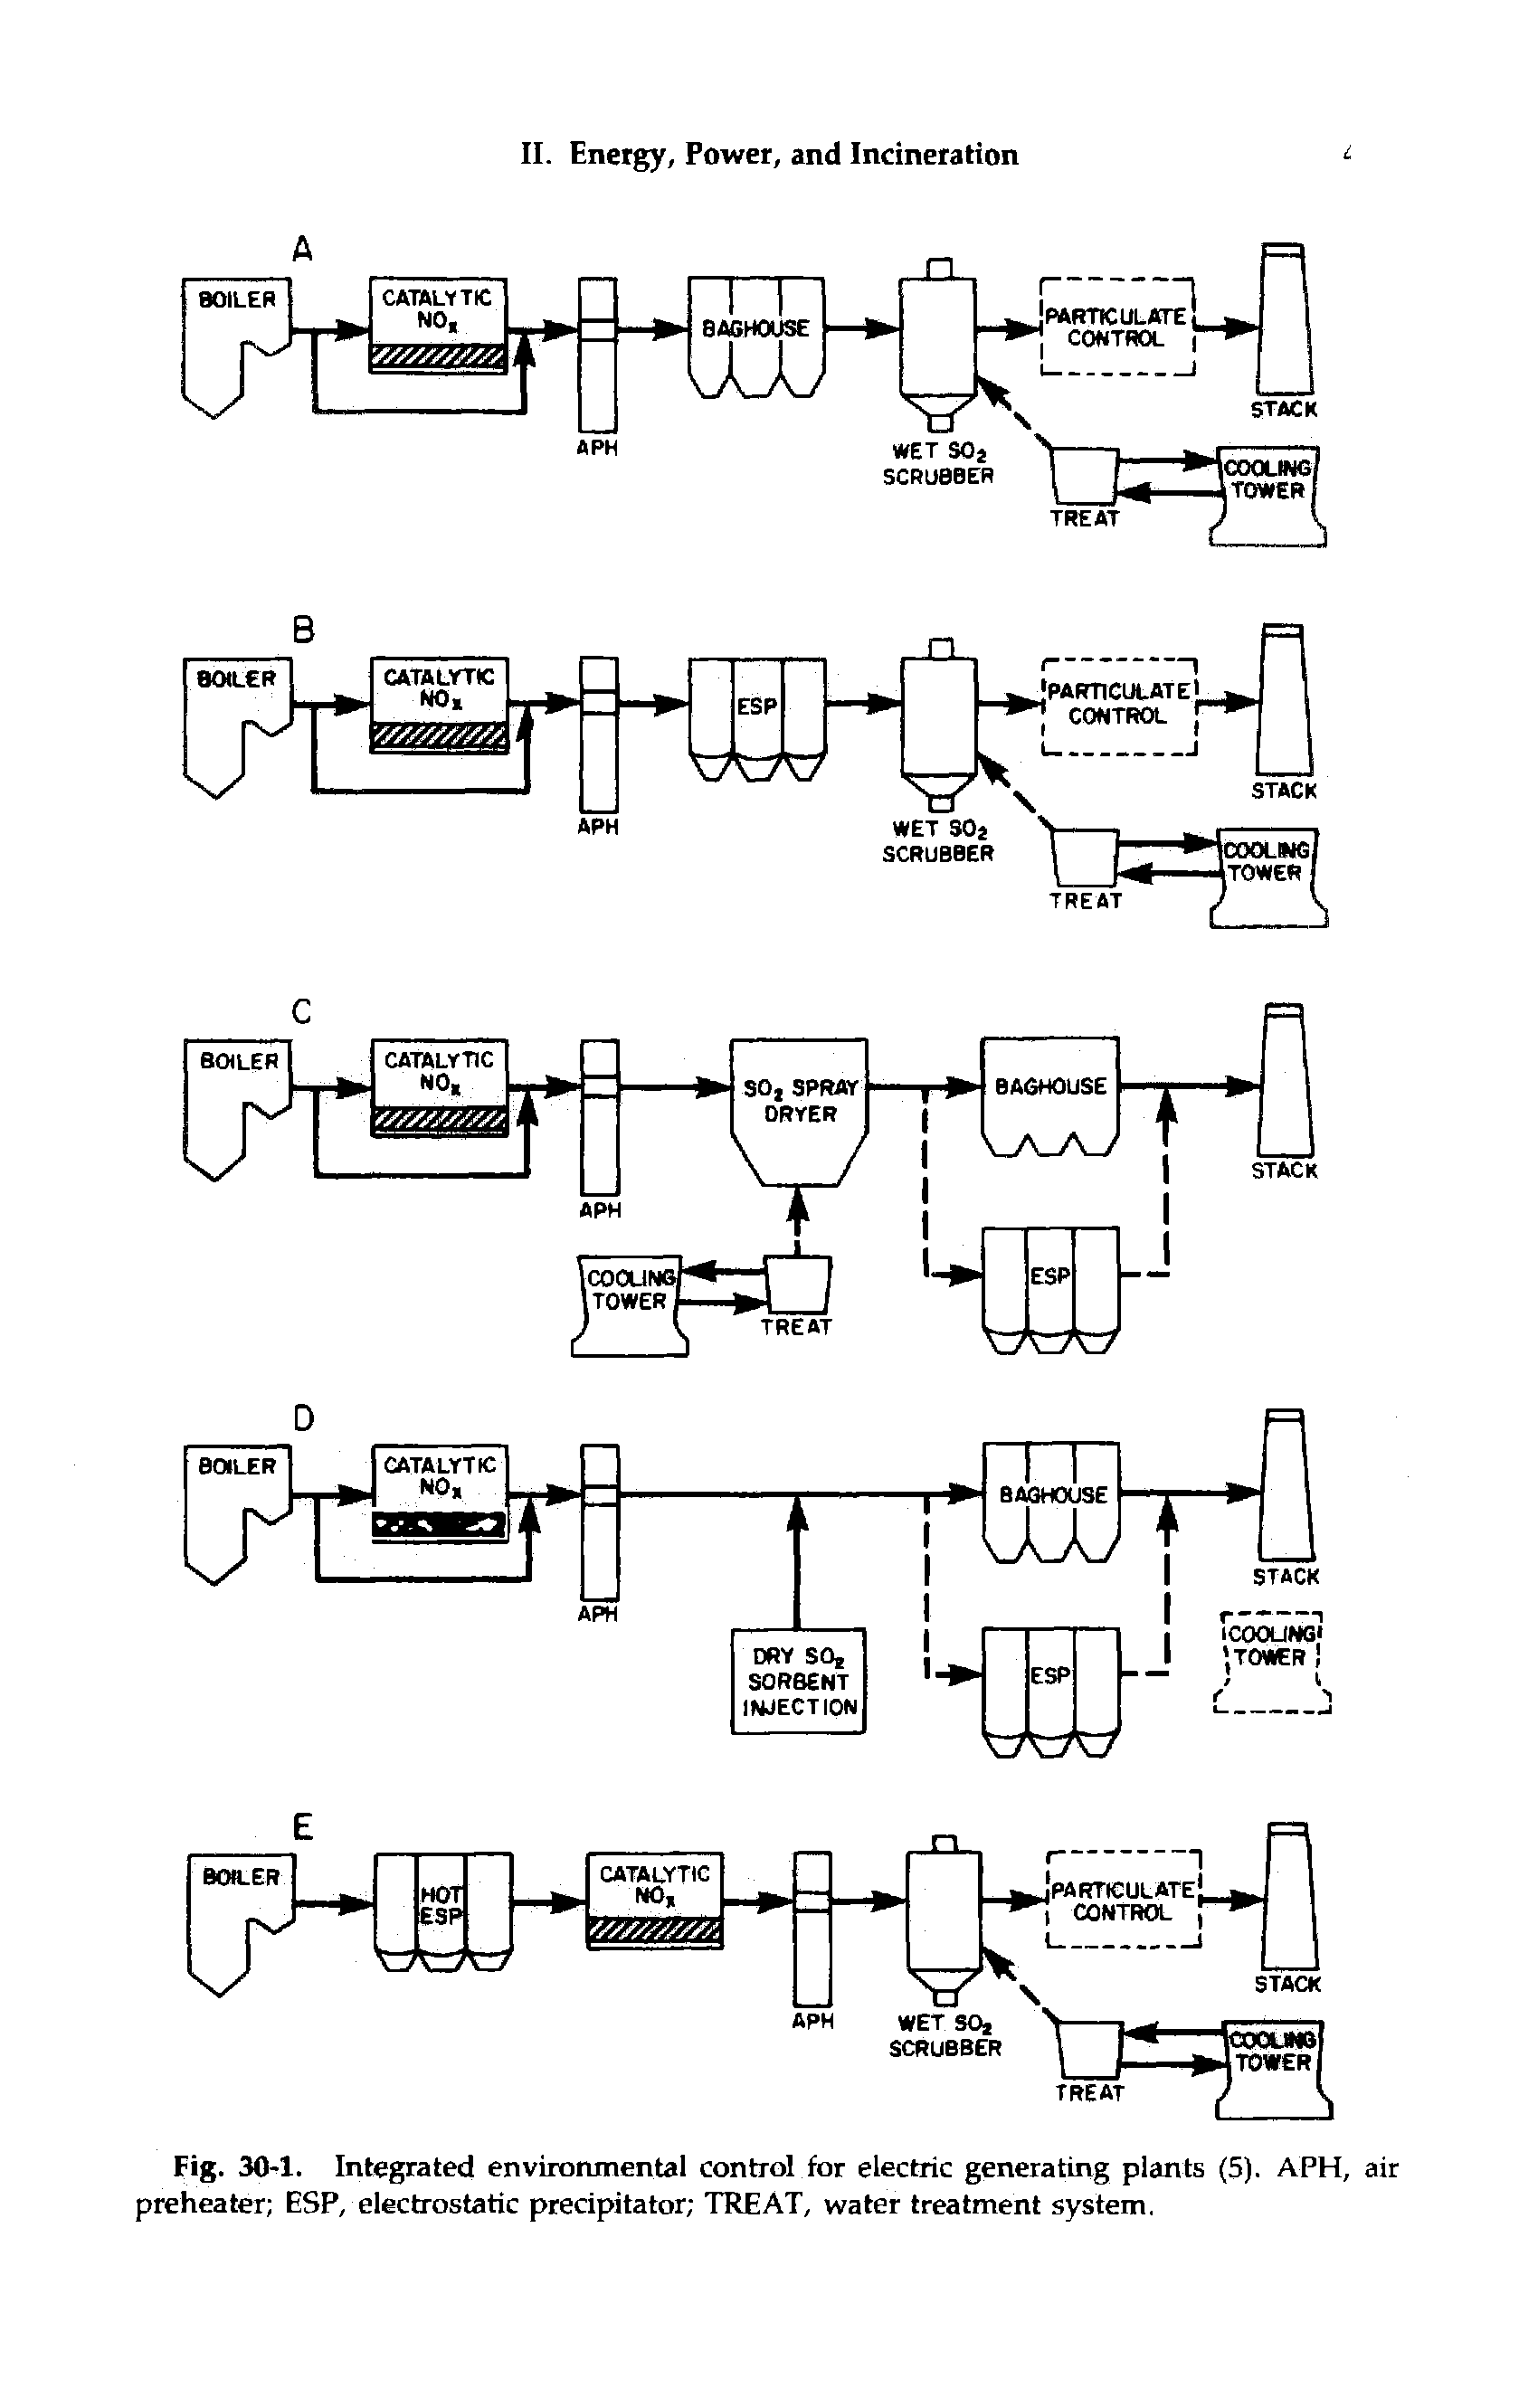 Fig. 30-1. Integrated environmental control for electric generating plants (5). APH, air preheater ESP, electrostatic precipitator TREAT, water treatment system.